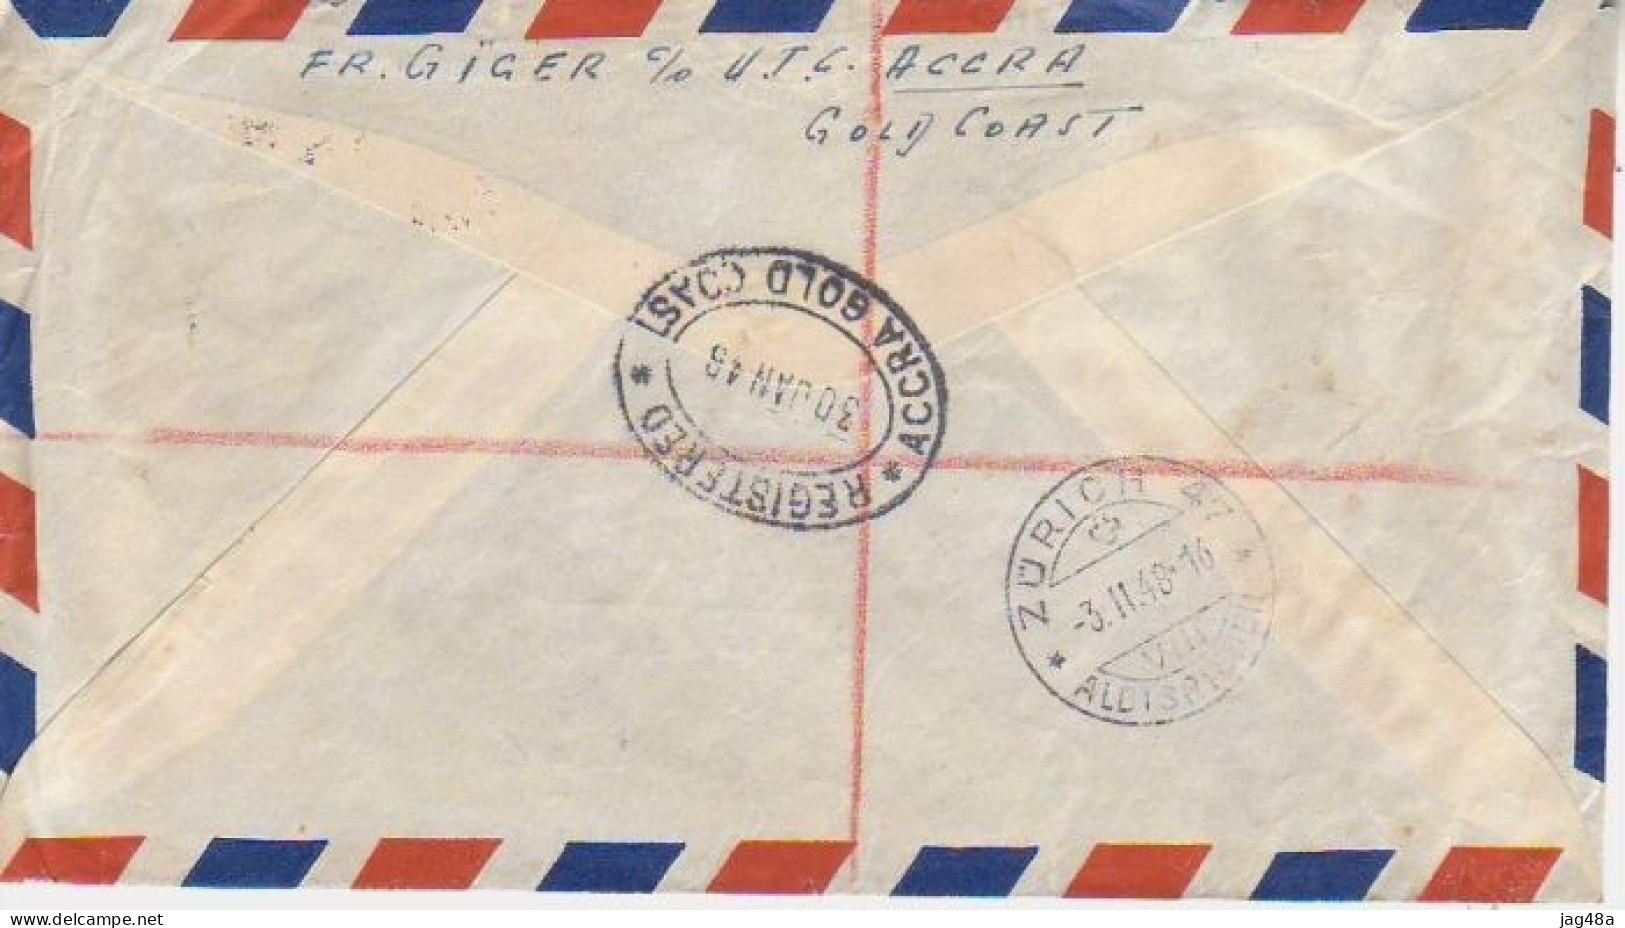 GOLD COAST. 1948/Accra, Registered Letter,envelope/mixed-franking. - Côte D'Or (...-1957)